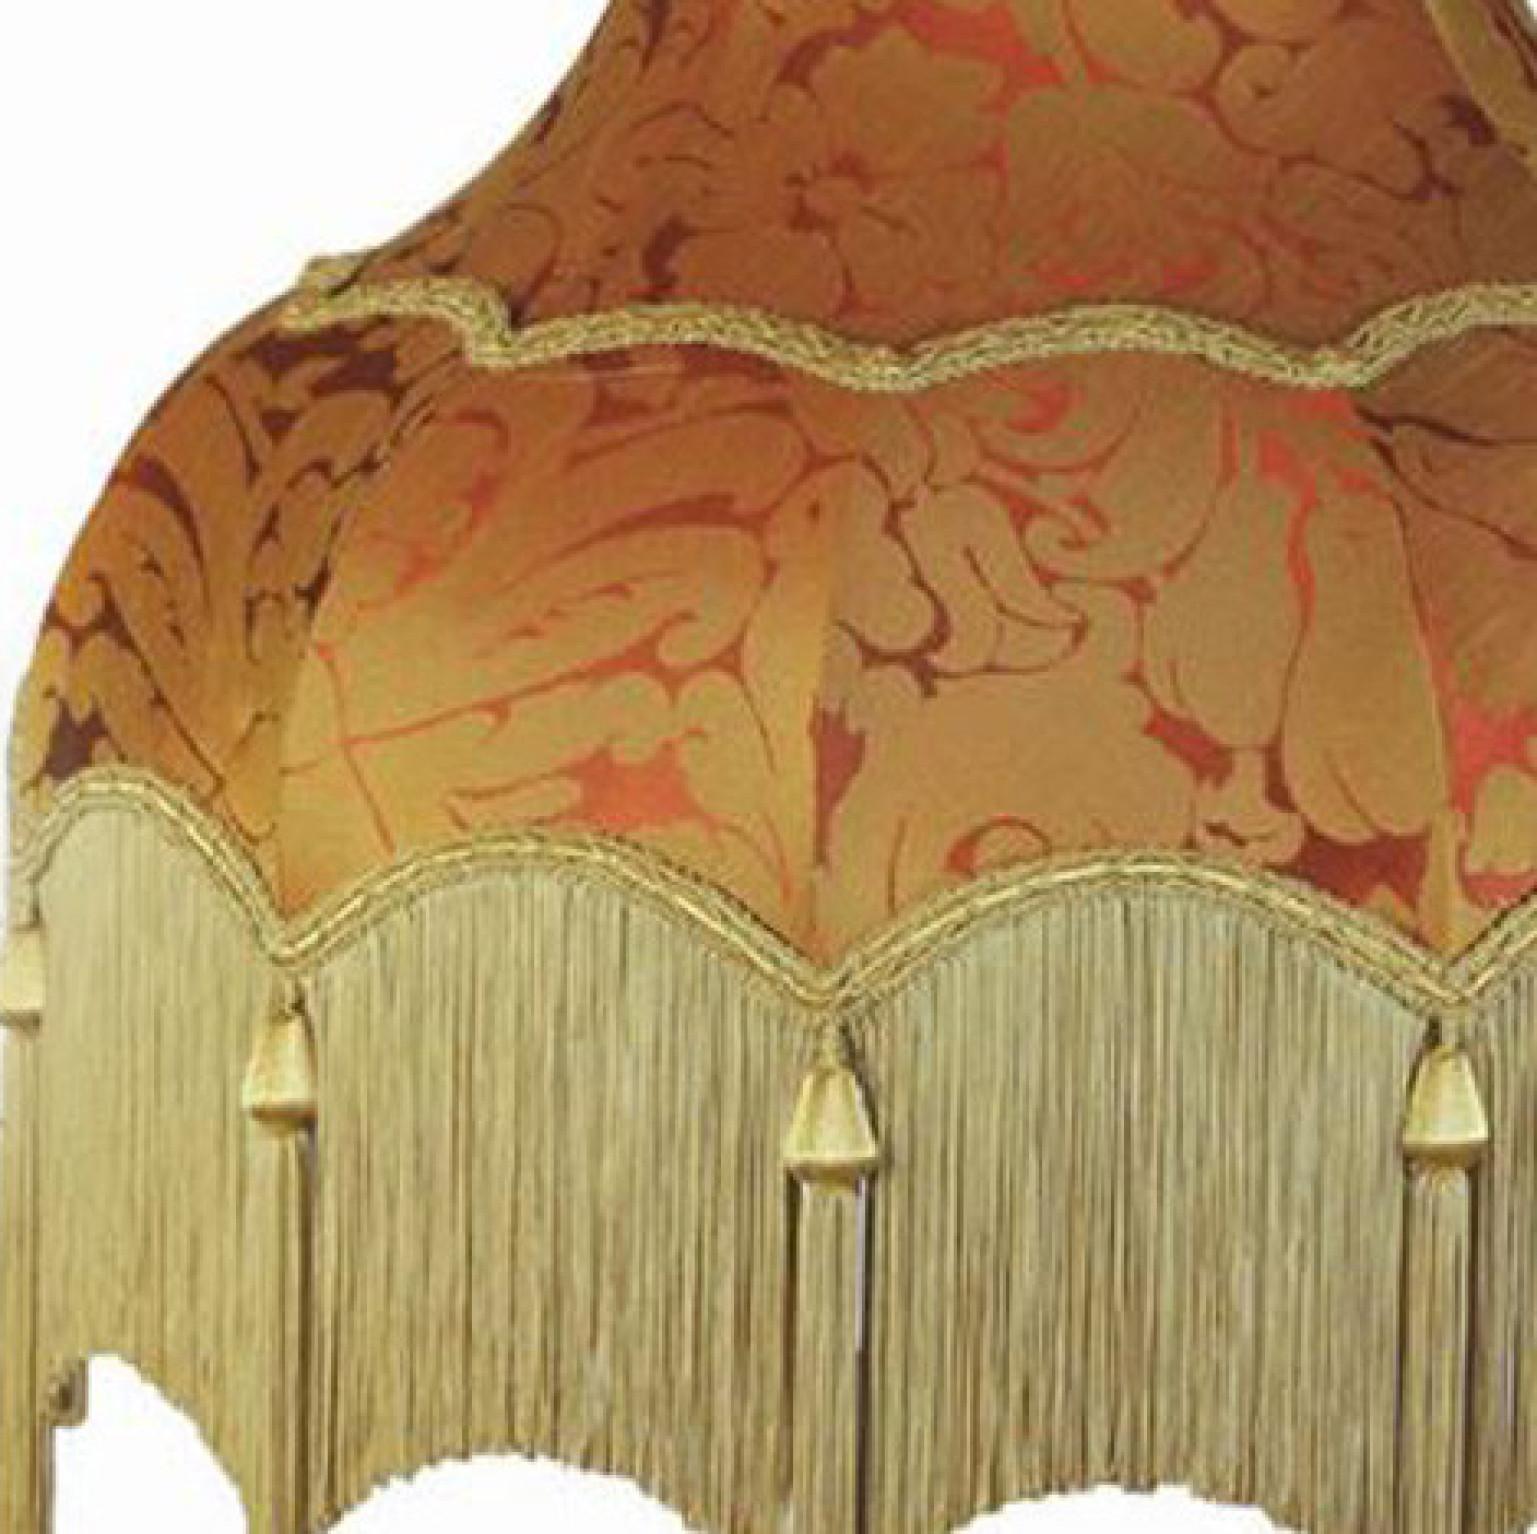 Wood Carved Floor Lamp with Fringed Lampshade, Italy, 1970s For Sale 1